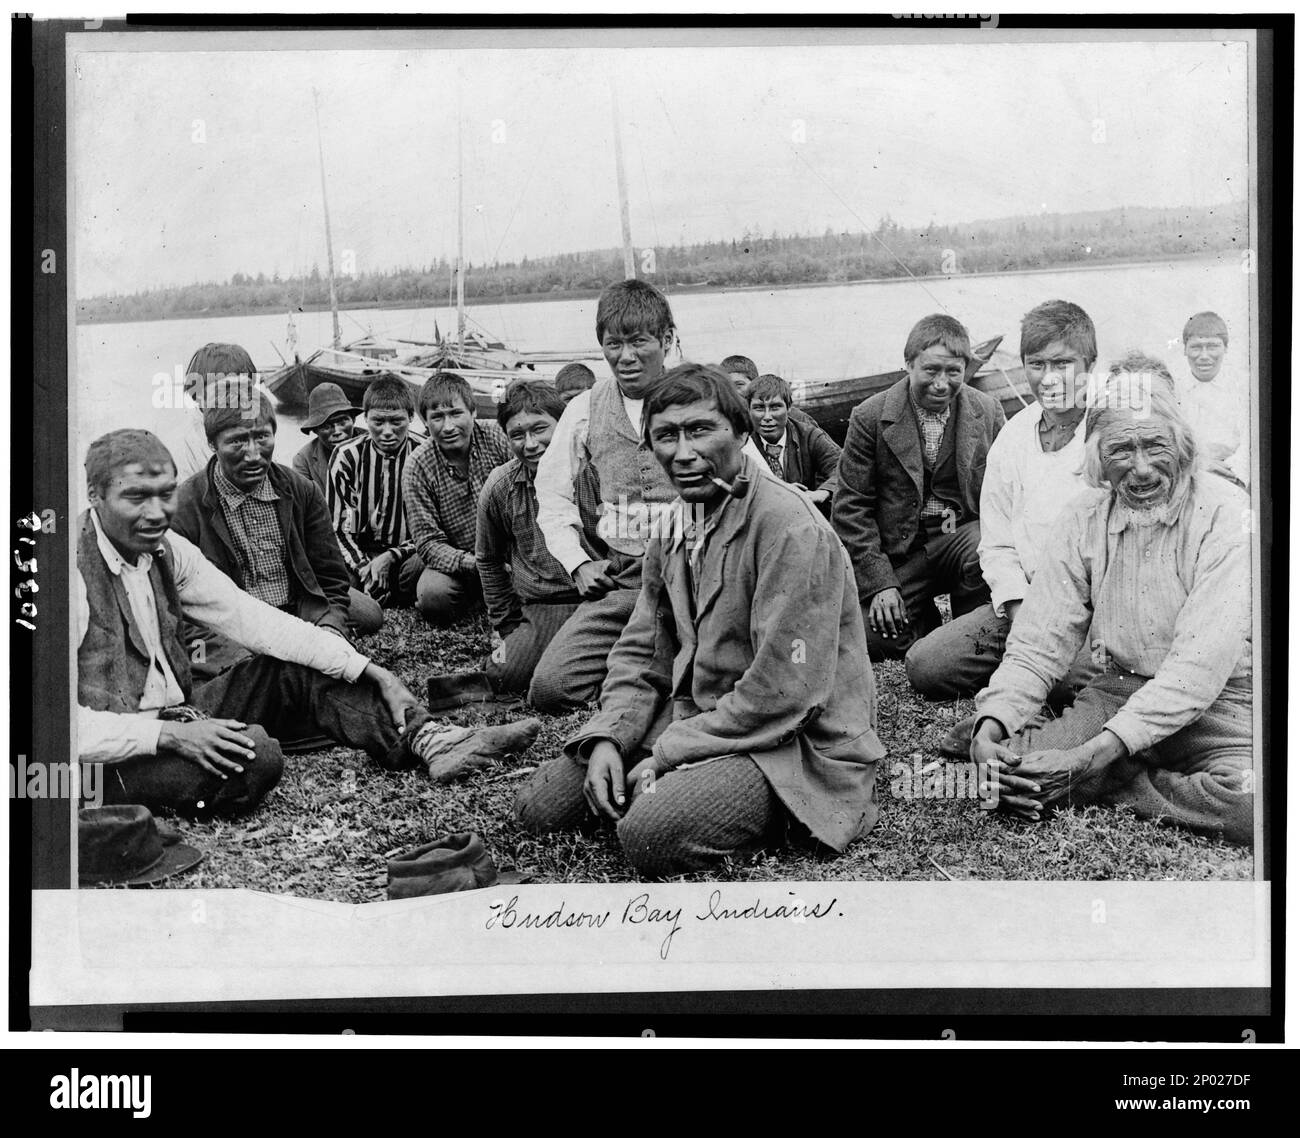 Hudson Bay Indians. Frank and Frances Carpenter Collection, Indians of North America,Hudson Bay Region,1890-1930. Stock Photo